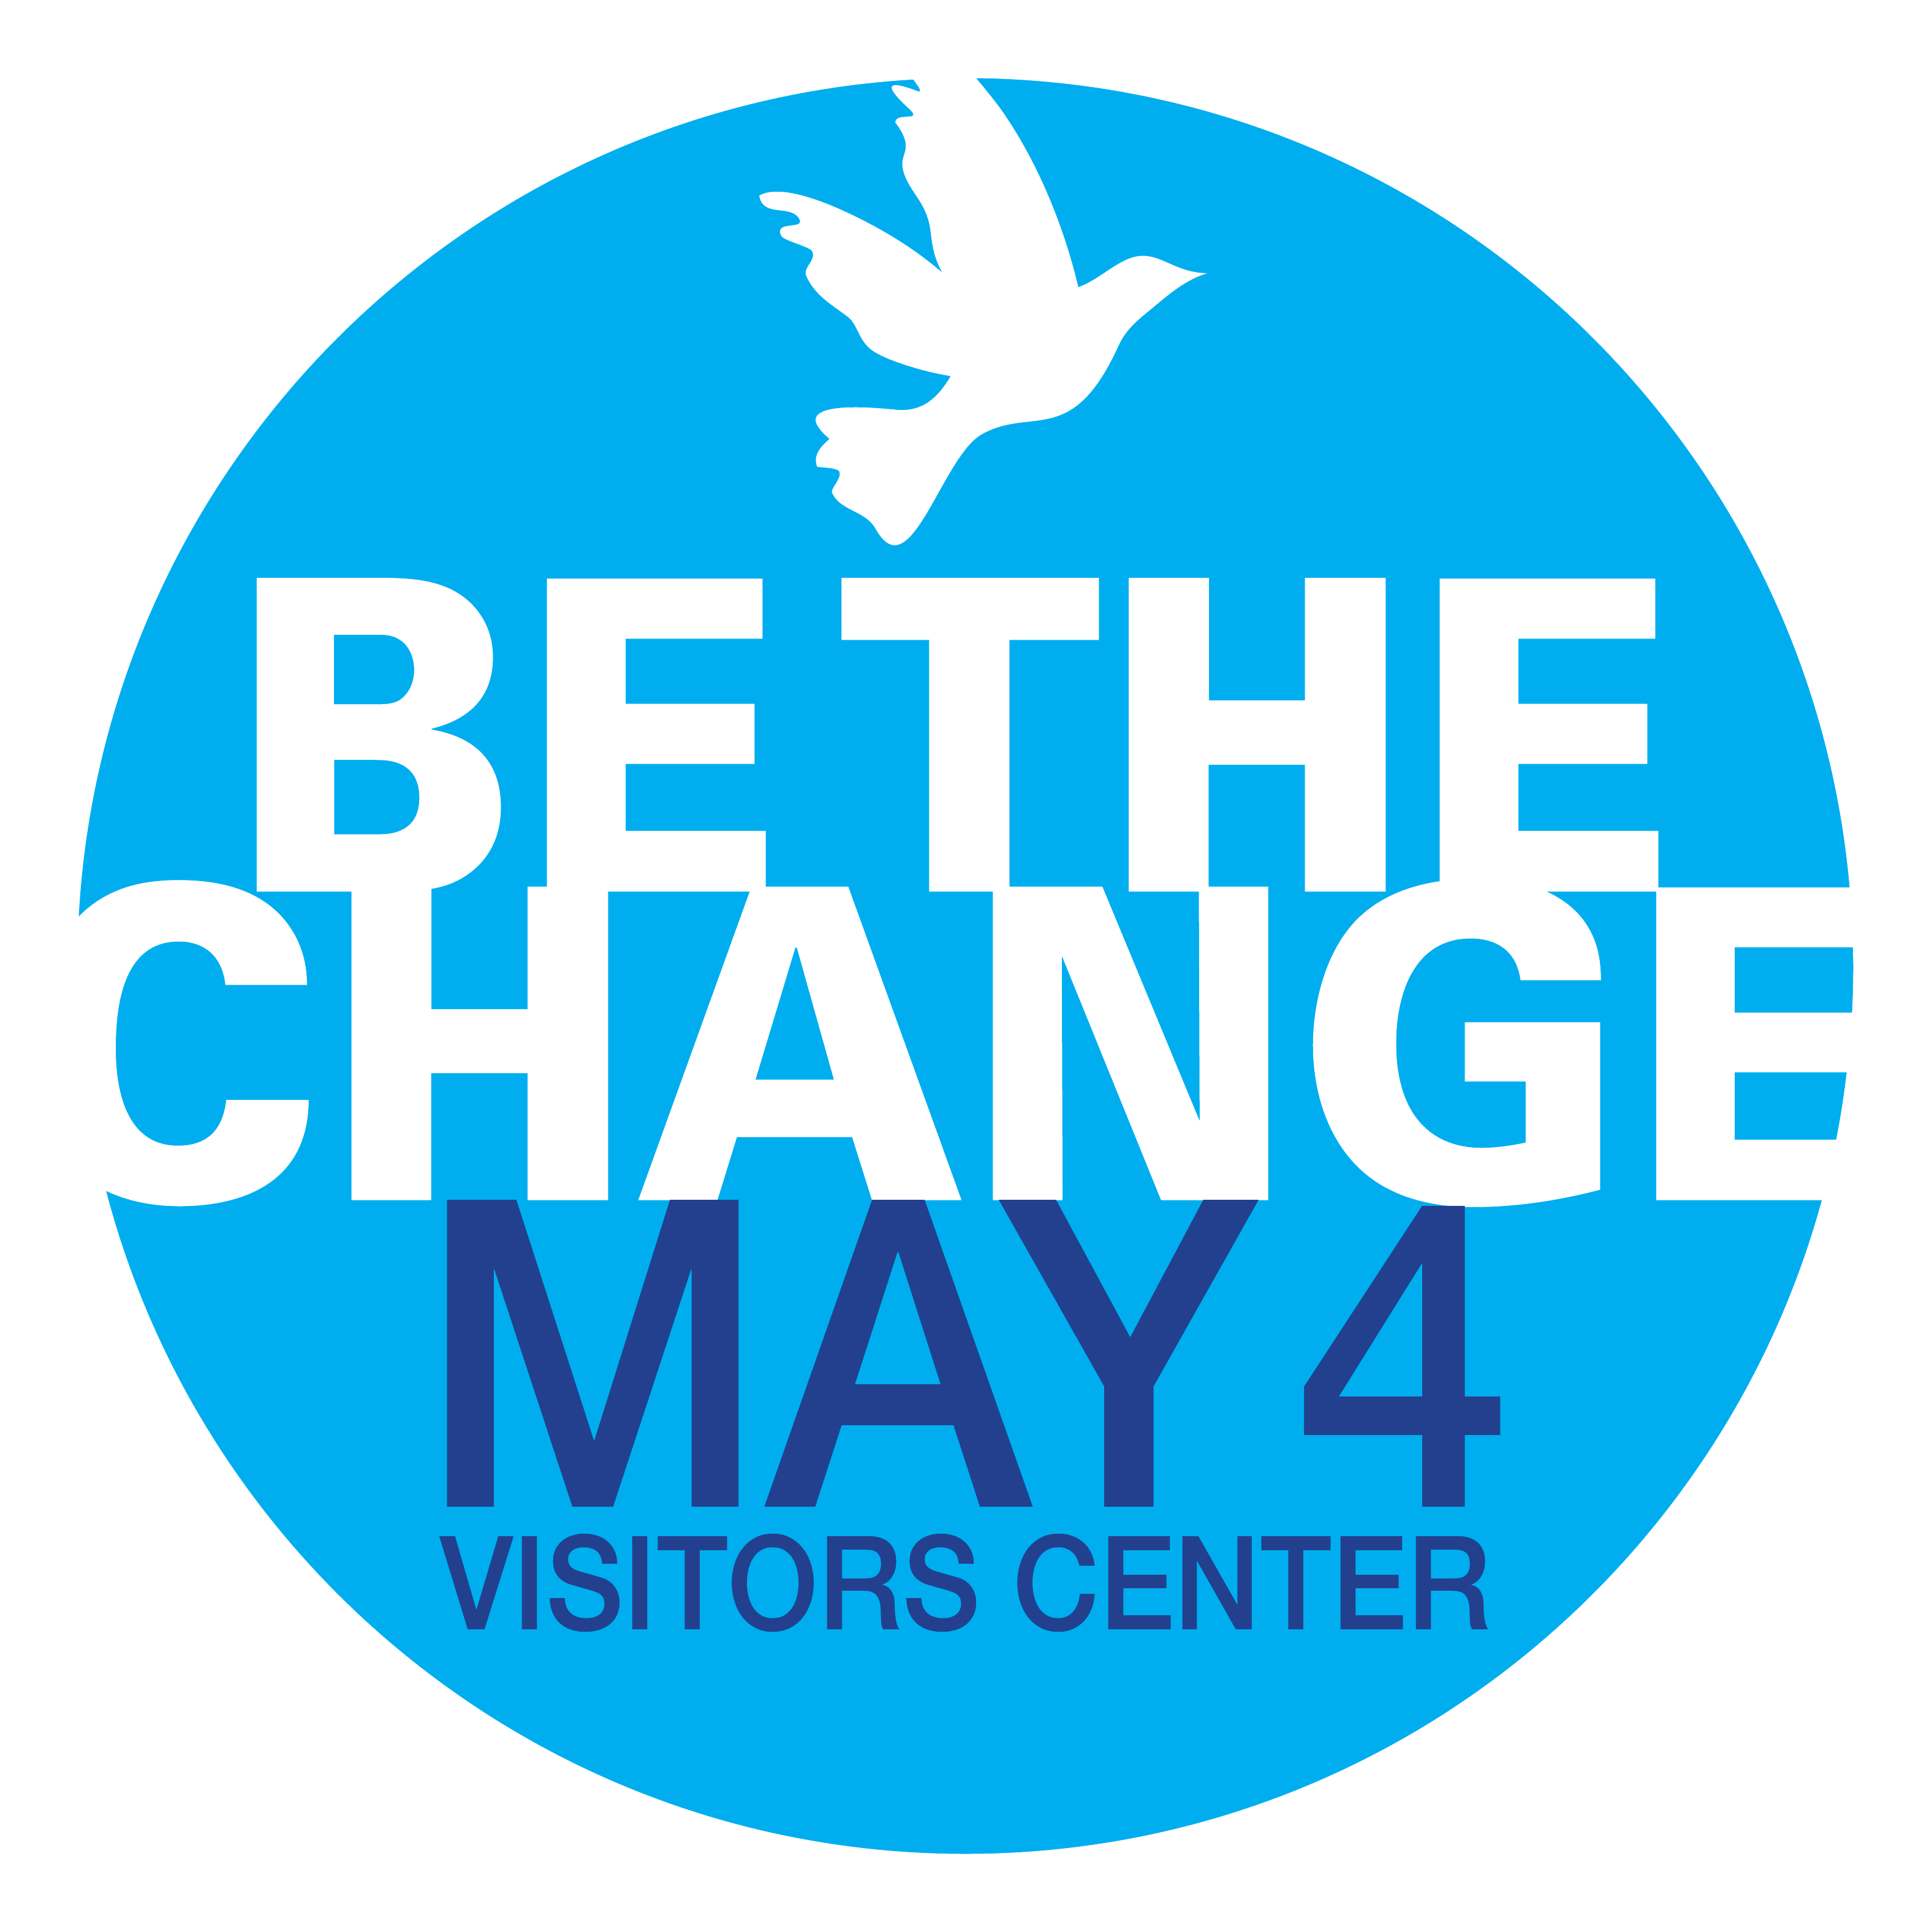 The May 4 Visitors Center is a permanent exhibit that tells the story of the Kent State shootings set in the context of the 1960s.